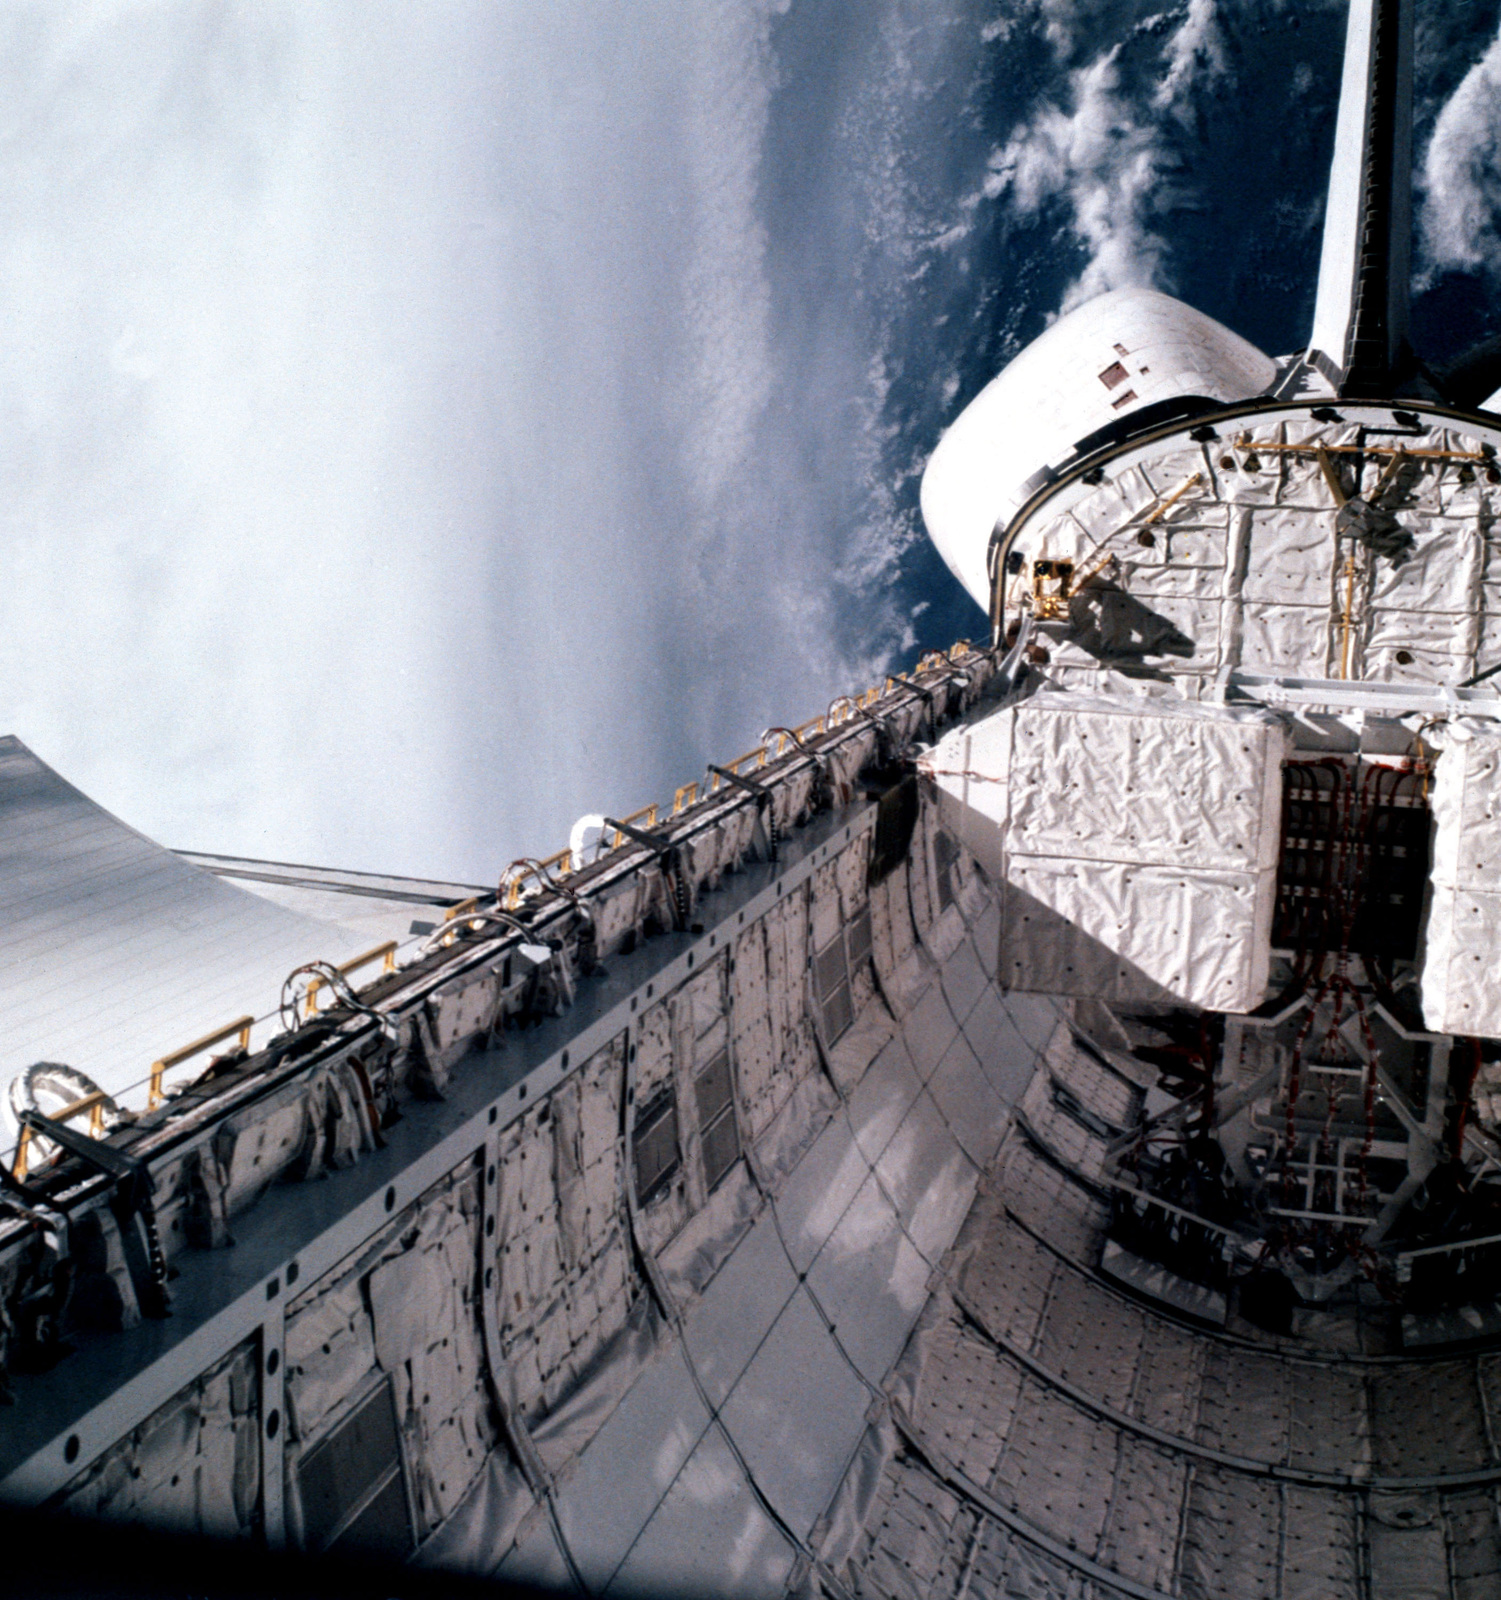 a-view-of-the-opened-cargo-bay-of-the-space-shuttle-orbiter-columbia-during-77d758-1600.jpg